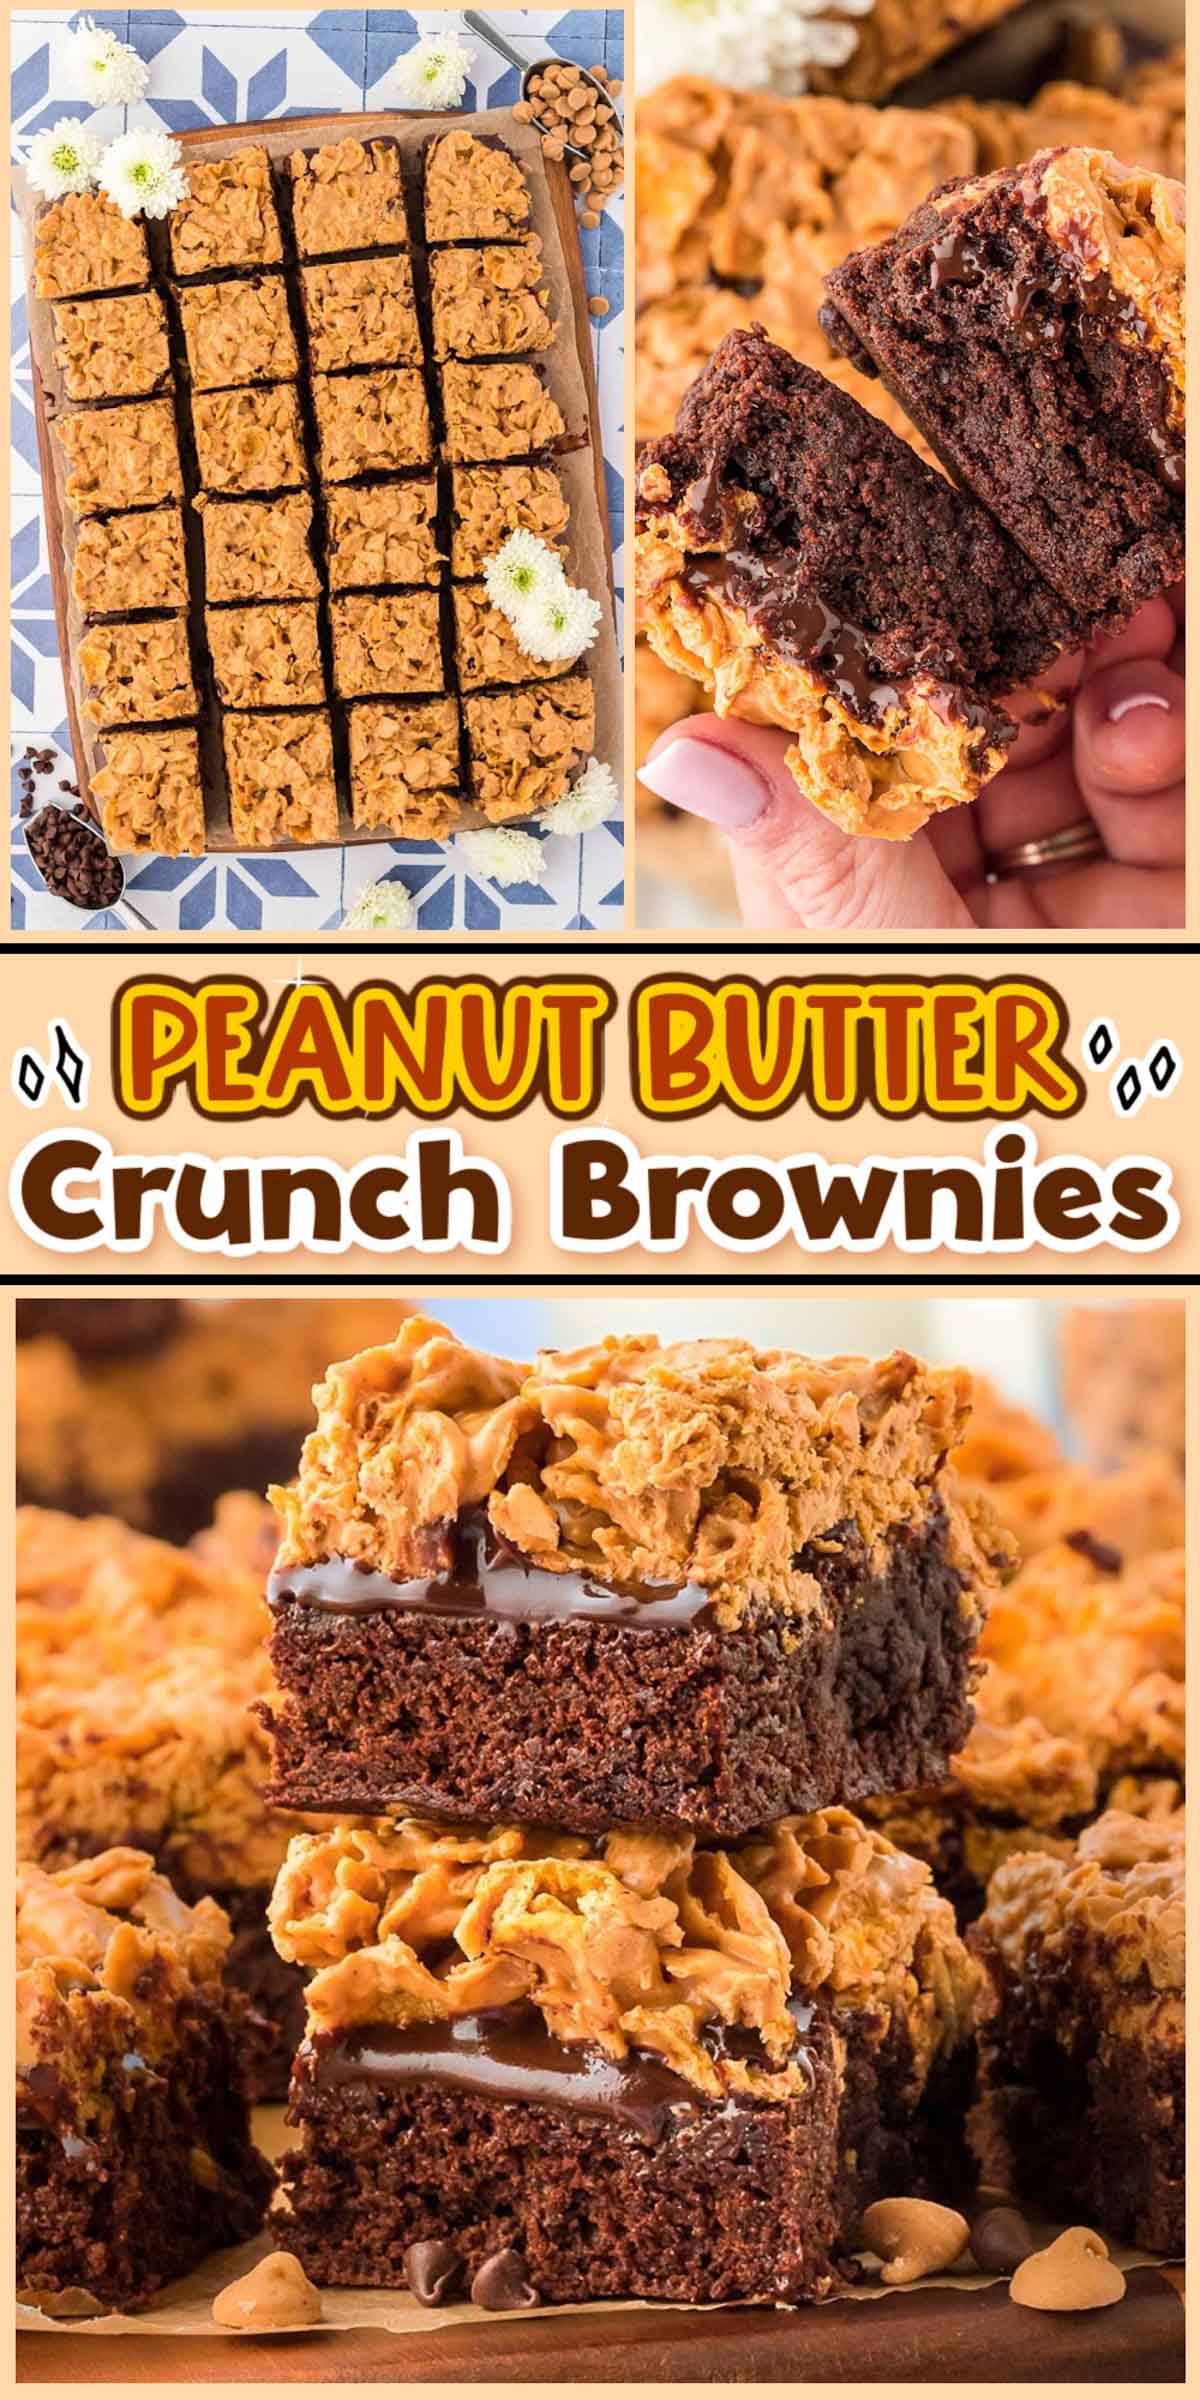 Peanut Butter Crunch Brownies are an impressive treat made with homemade brownies, hot fudge, and a peanut butter crunch topping! A gourmet twist on a classic dessert that's easy to make! via @sugarandsoulco